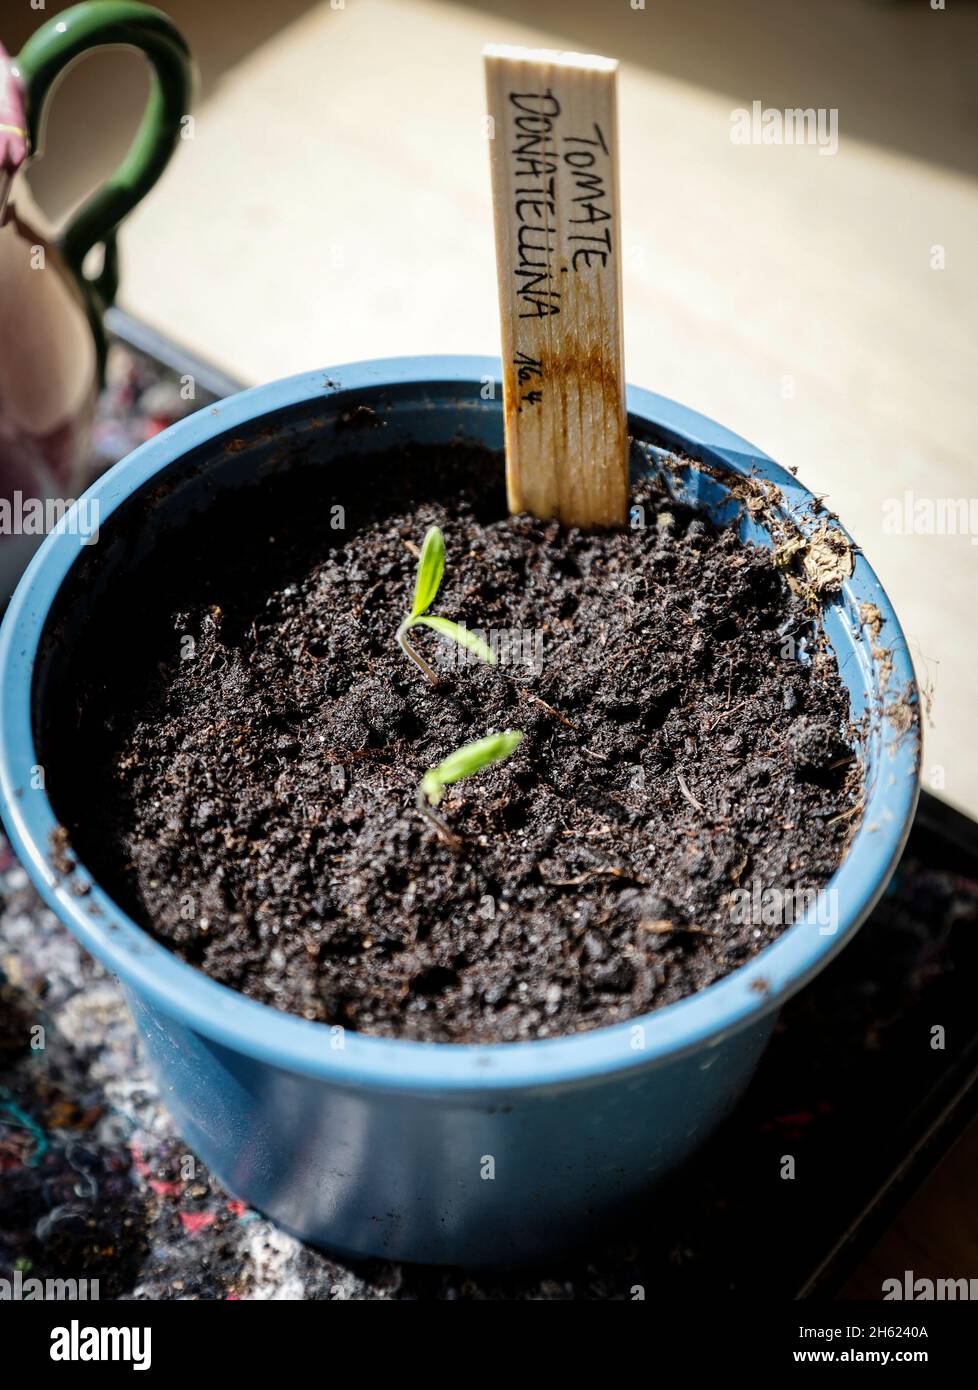 growing tomatoes by the window Stock Photo